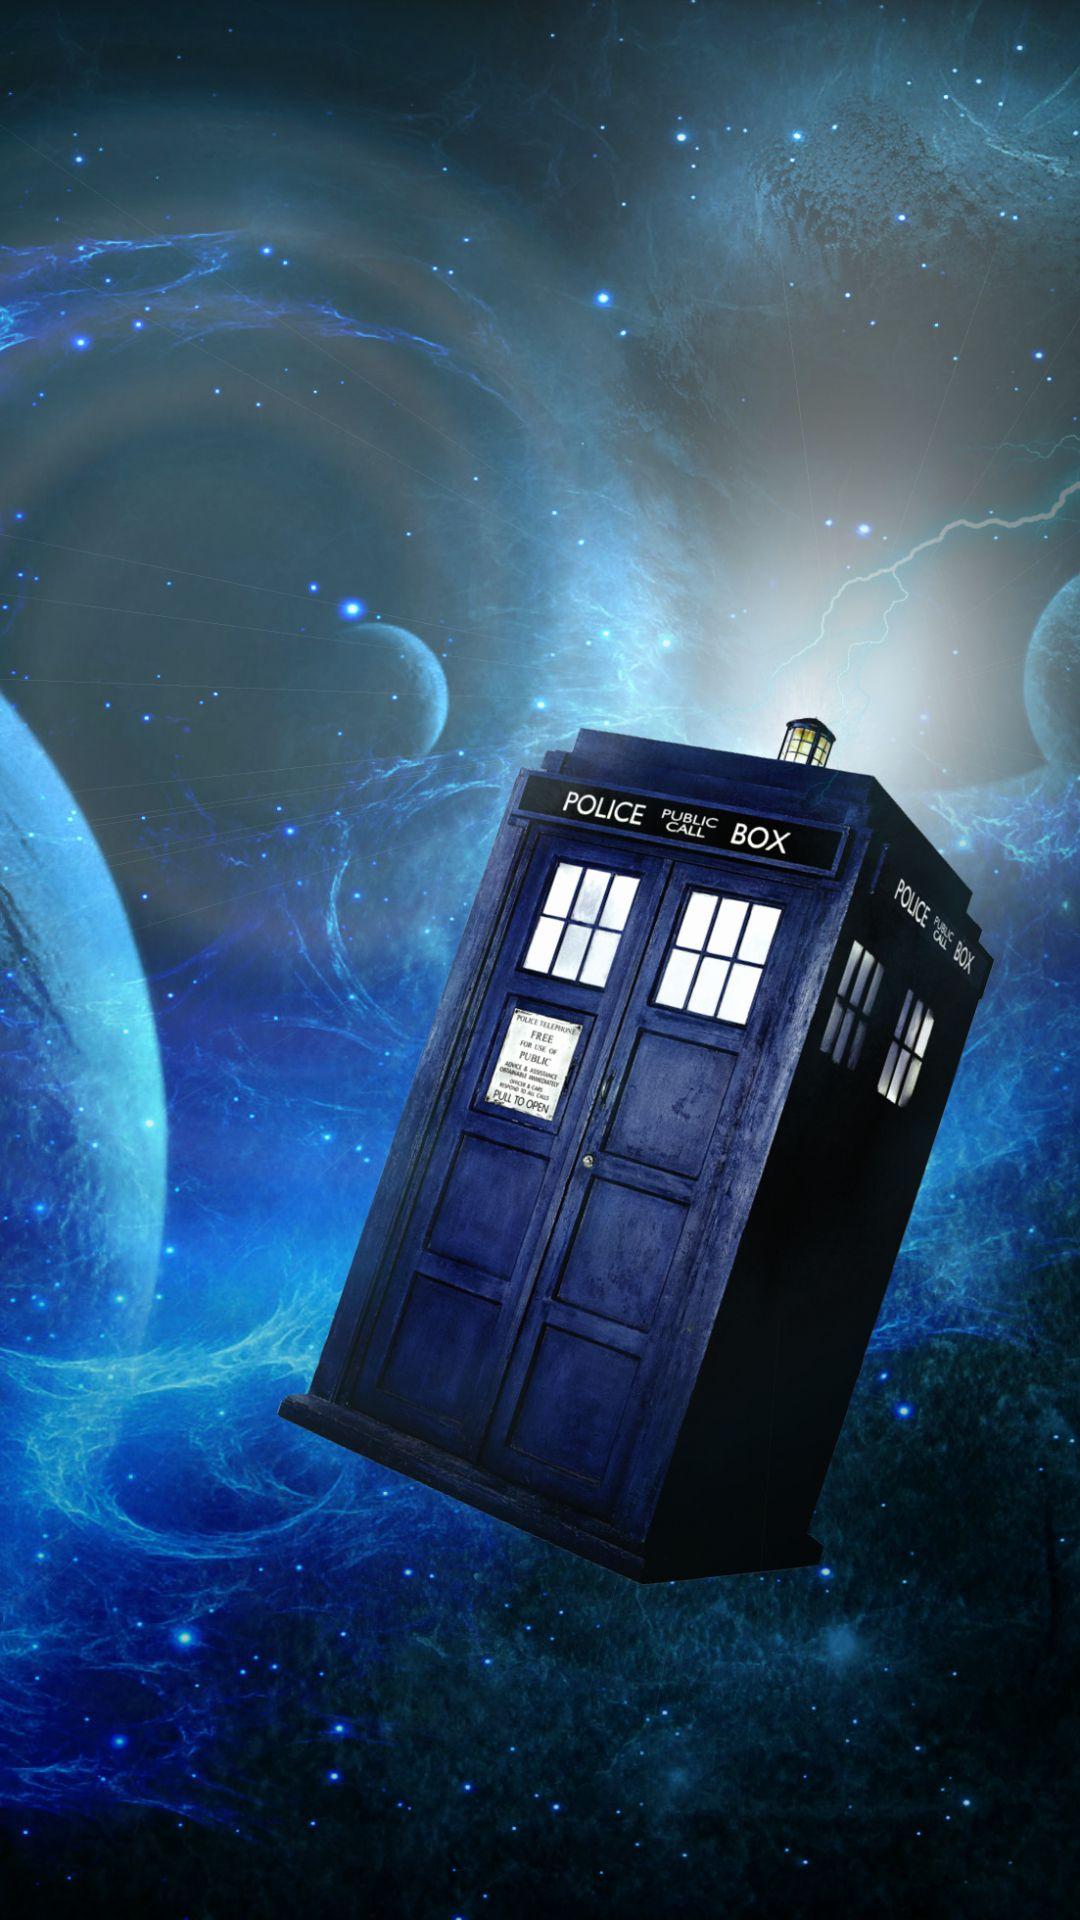 TARDIS Console Display  iPhone X Wallpaper by CComMagic on DeviantArt